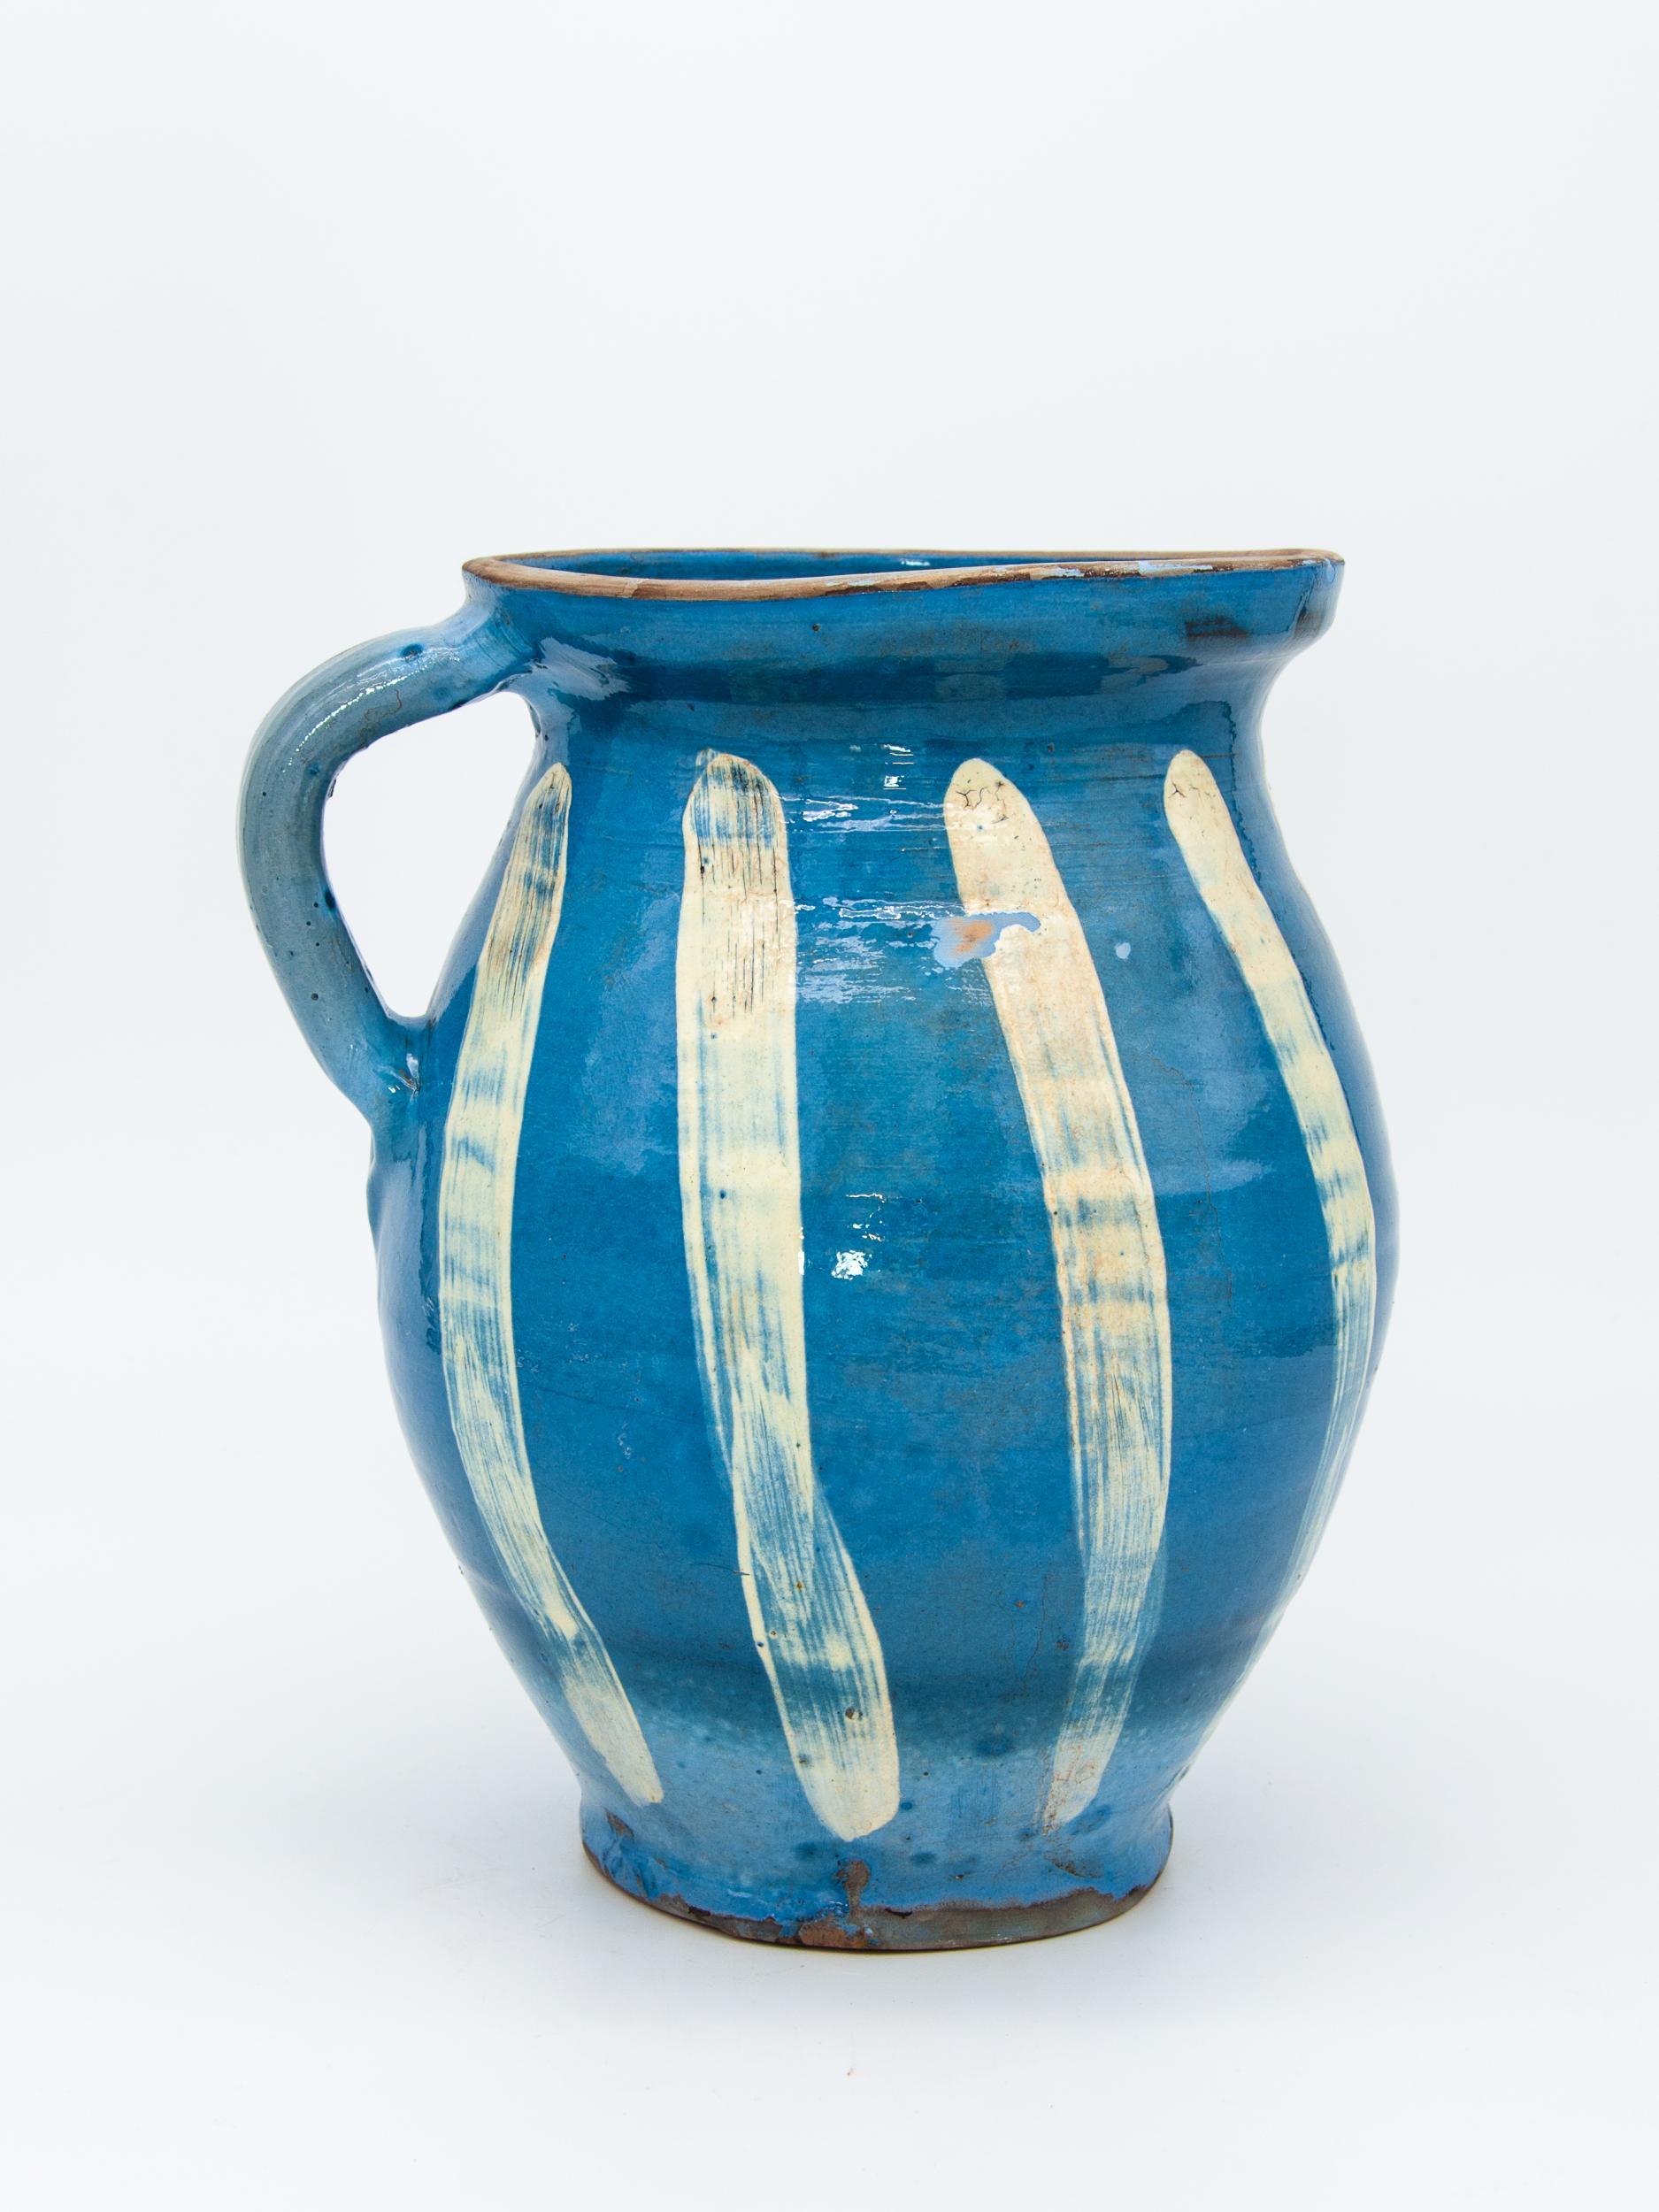 A handmade pitcher with blue glaze and white stripes. Classic blue and white in a rustic style is perfect for a country setting.